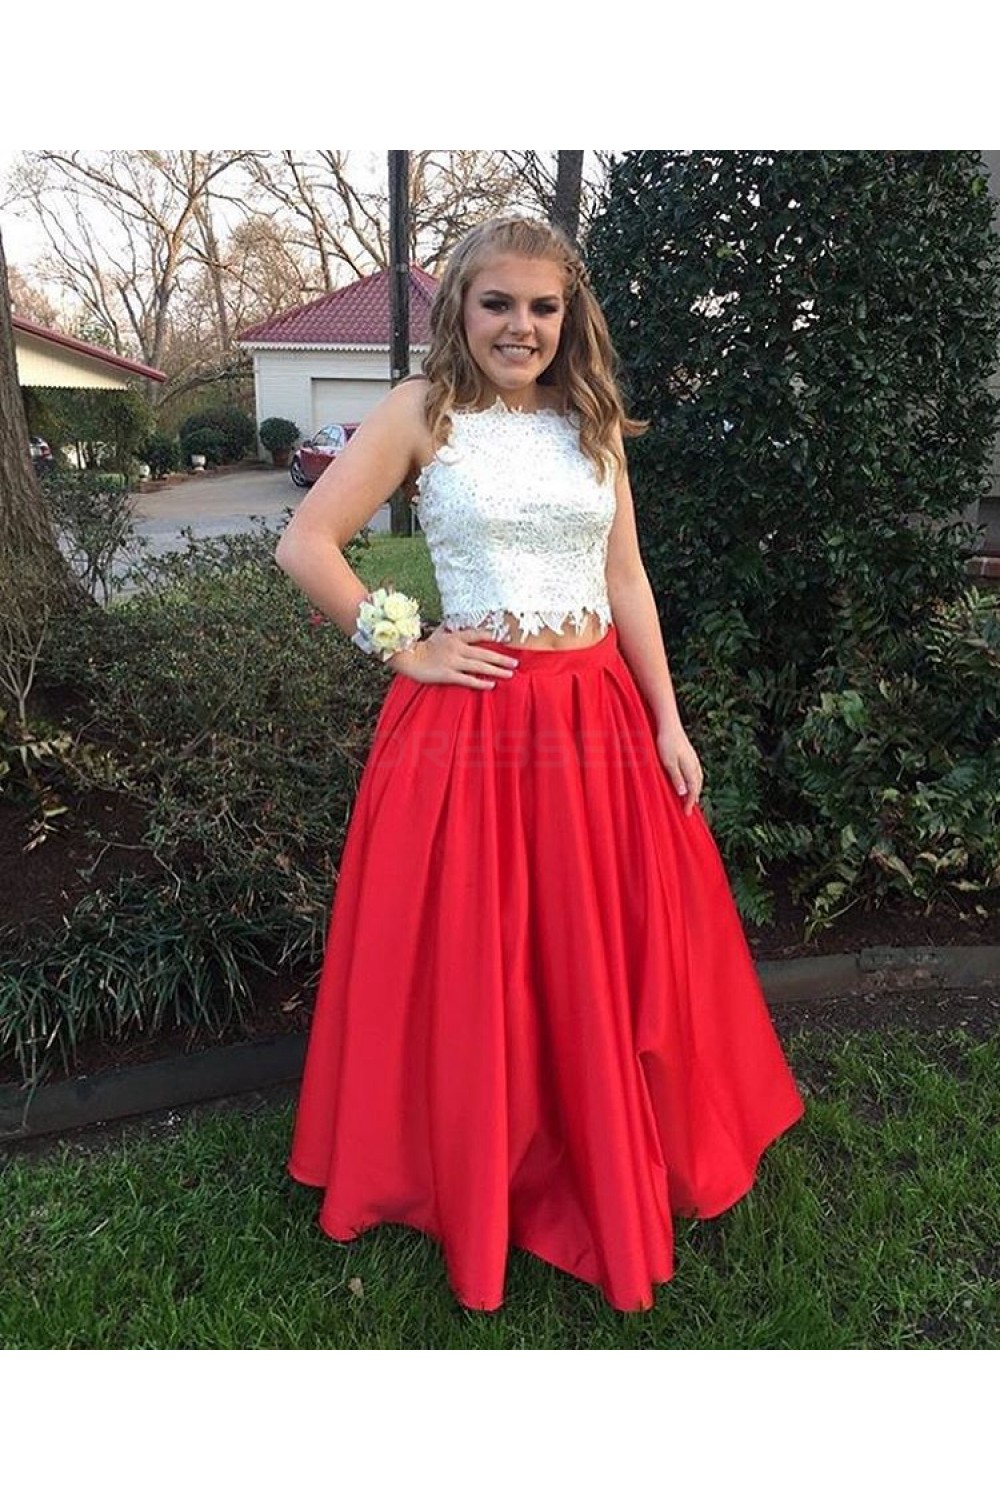 red and white prom